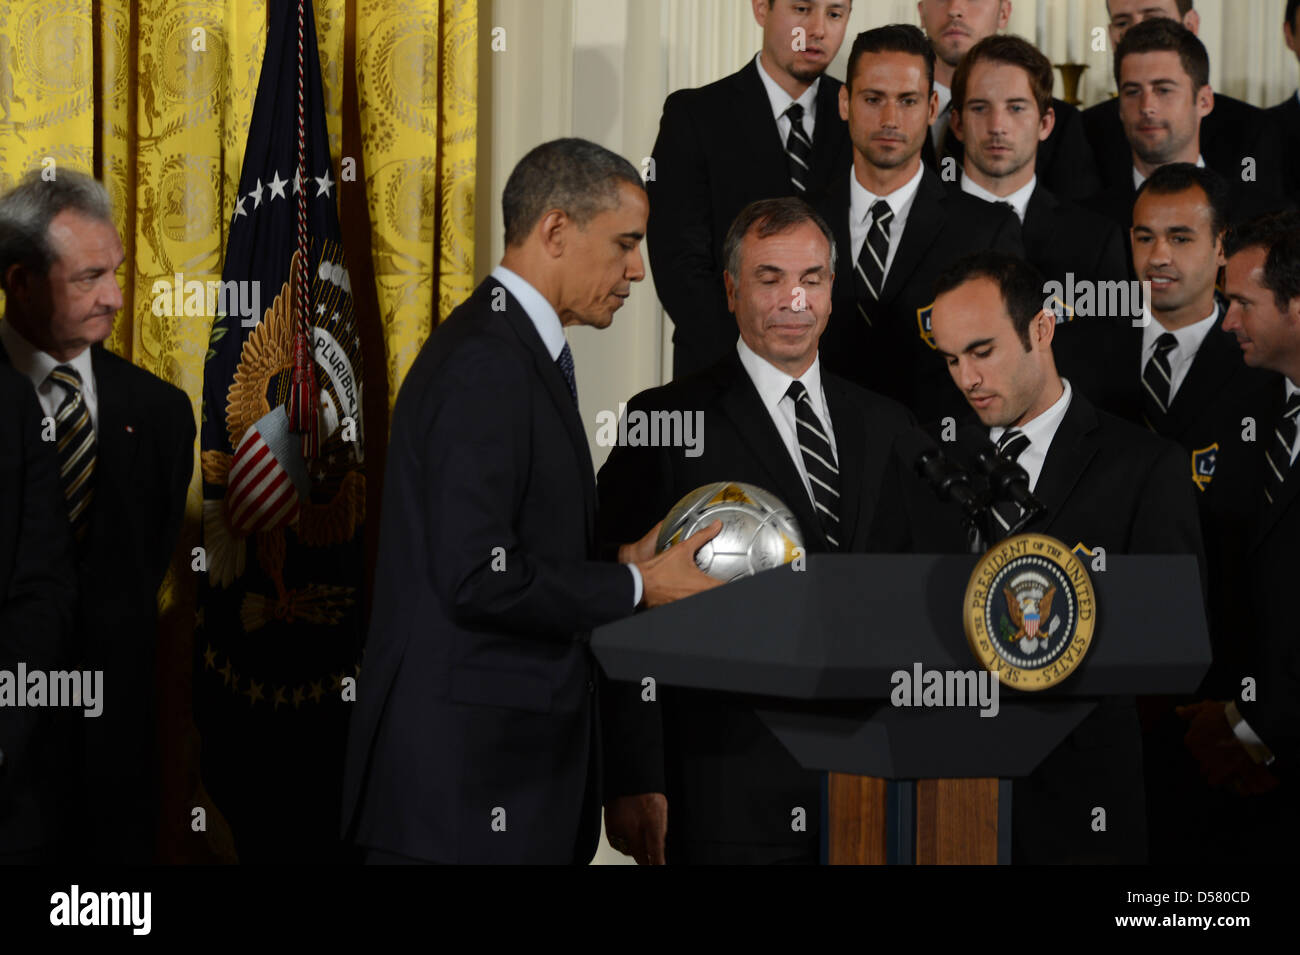 Washington, DC, USA. 26th March, 2013. The White House-Washington DC..President Barack Obama welcomes the Stanley Cup champion Los Angeles Kings and the Major League Soccer champion LA Galaxy to the White House to honor their 2012 championship seasons in a ceremony in the East Room.He accepts a soccer ball and jersey from the LA Galaxy team..photo:   - ImageCatcher News(Credit Image: Credit:  Christy Bowe/Globe Photos/ZUMAPRESS.com/Alamy Live News) Stock Photo